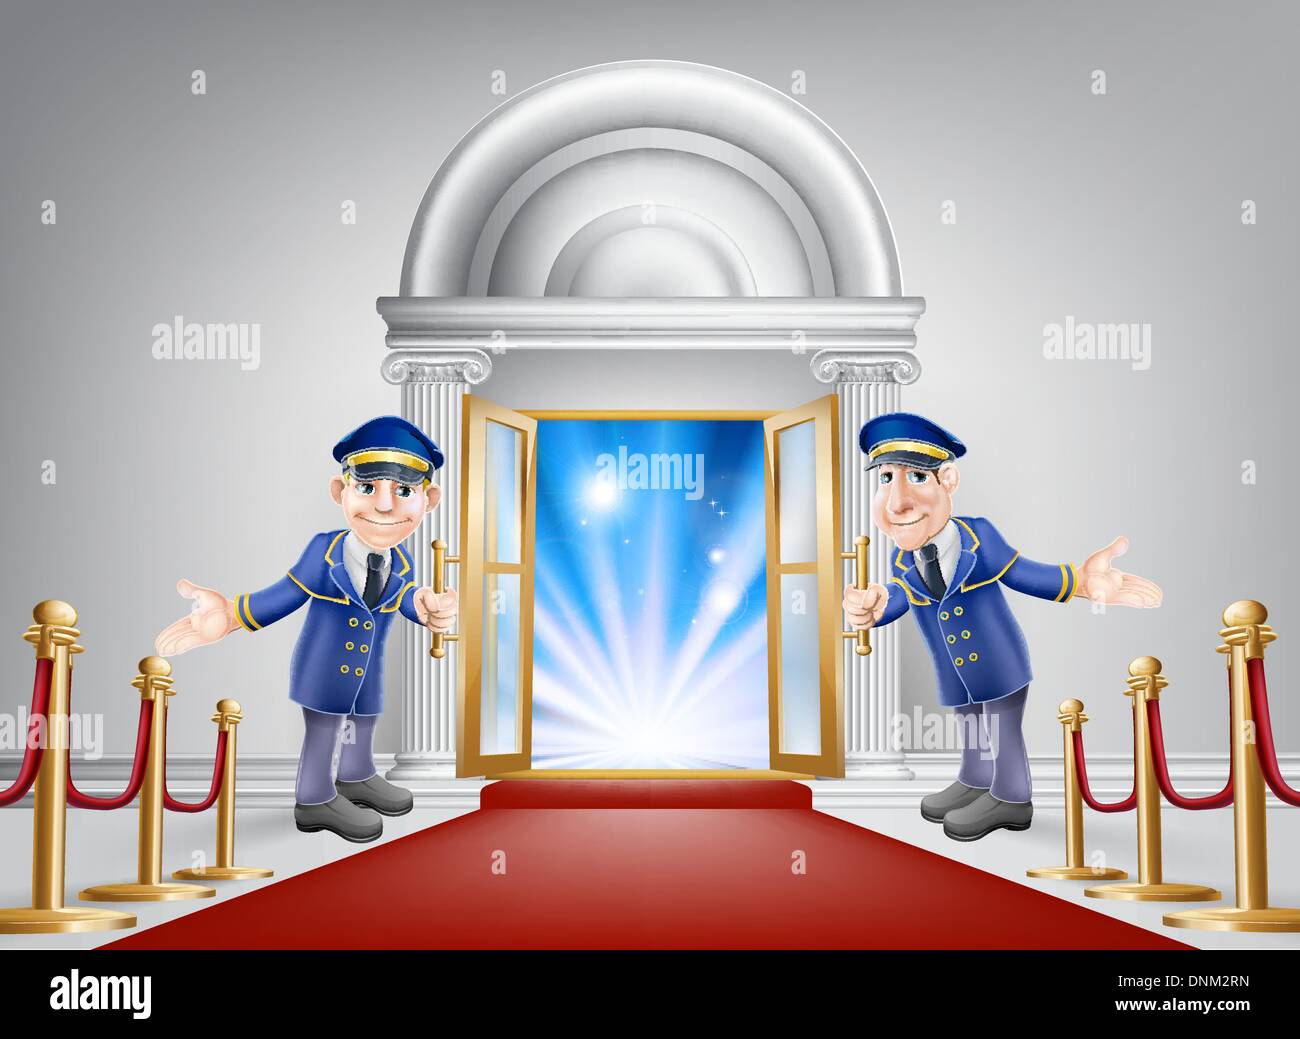 First class treatment conceptual illustration. A venue entrance with a red carpet and red velvet rope and two friendly doormen i Stock Vector